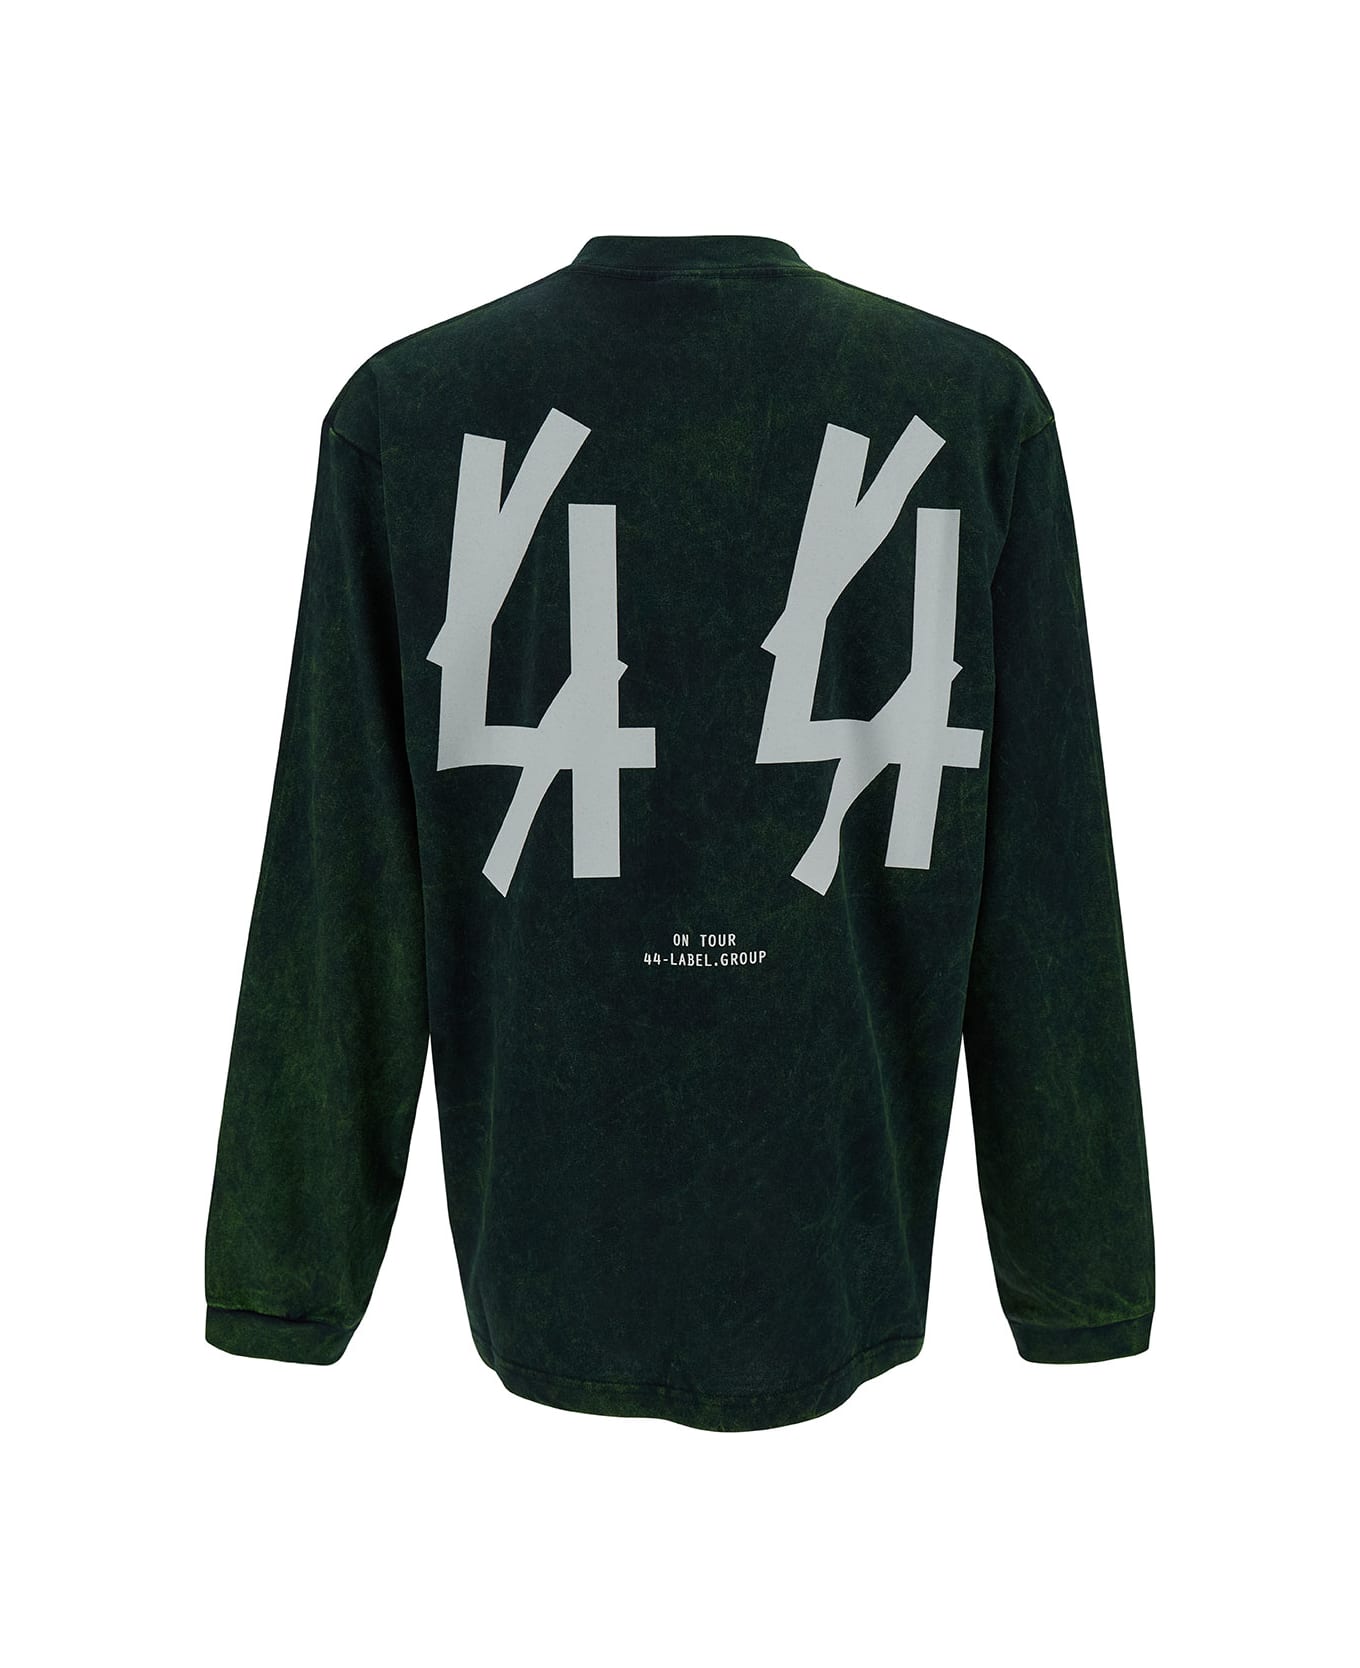 44 Label Group 'solar' Green Long Sleeve T-shirt With Contrasting Logo Print In Cotton Man - Green トップス